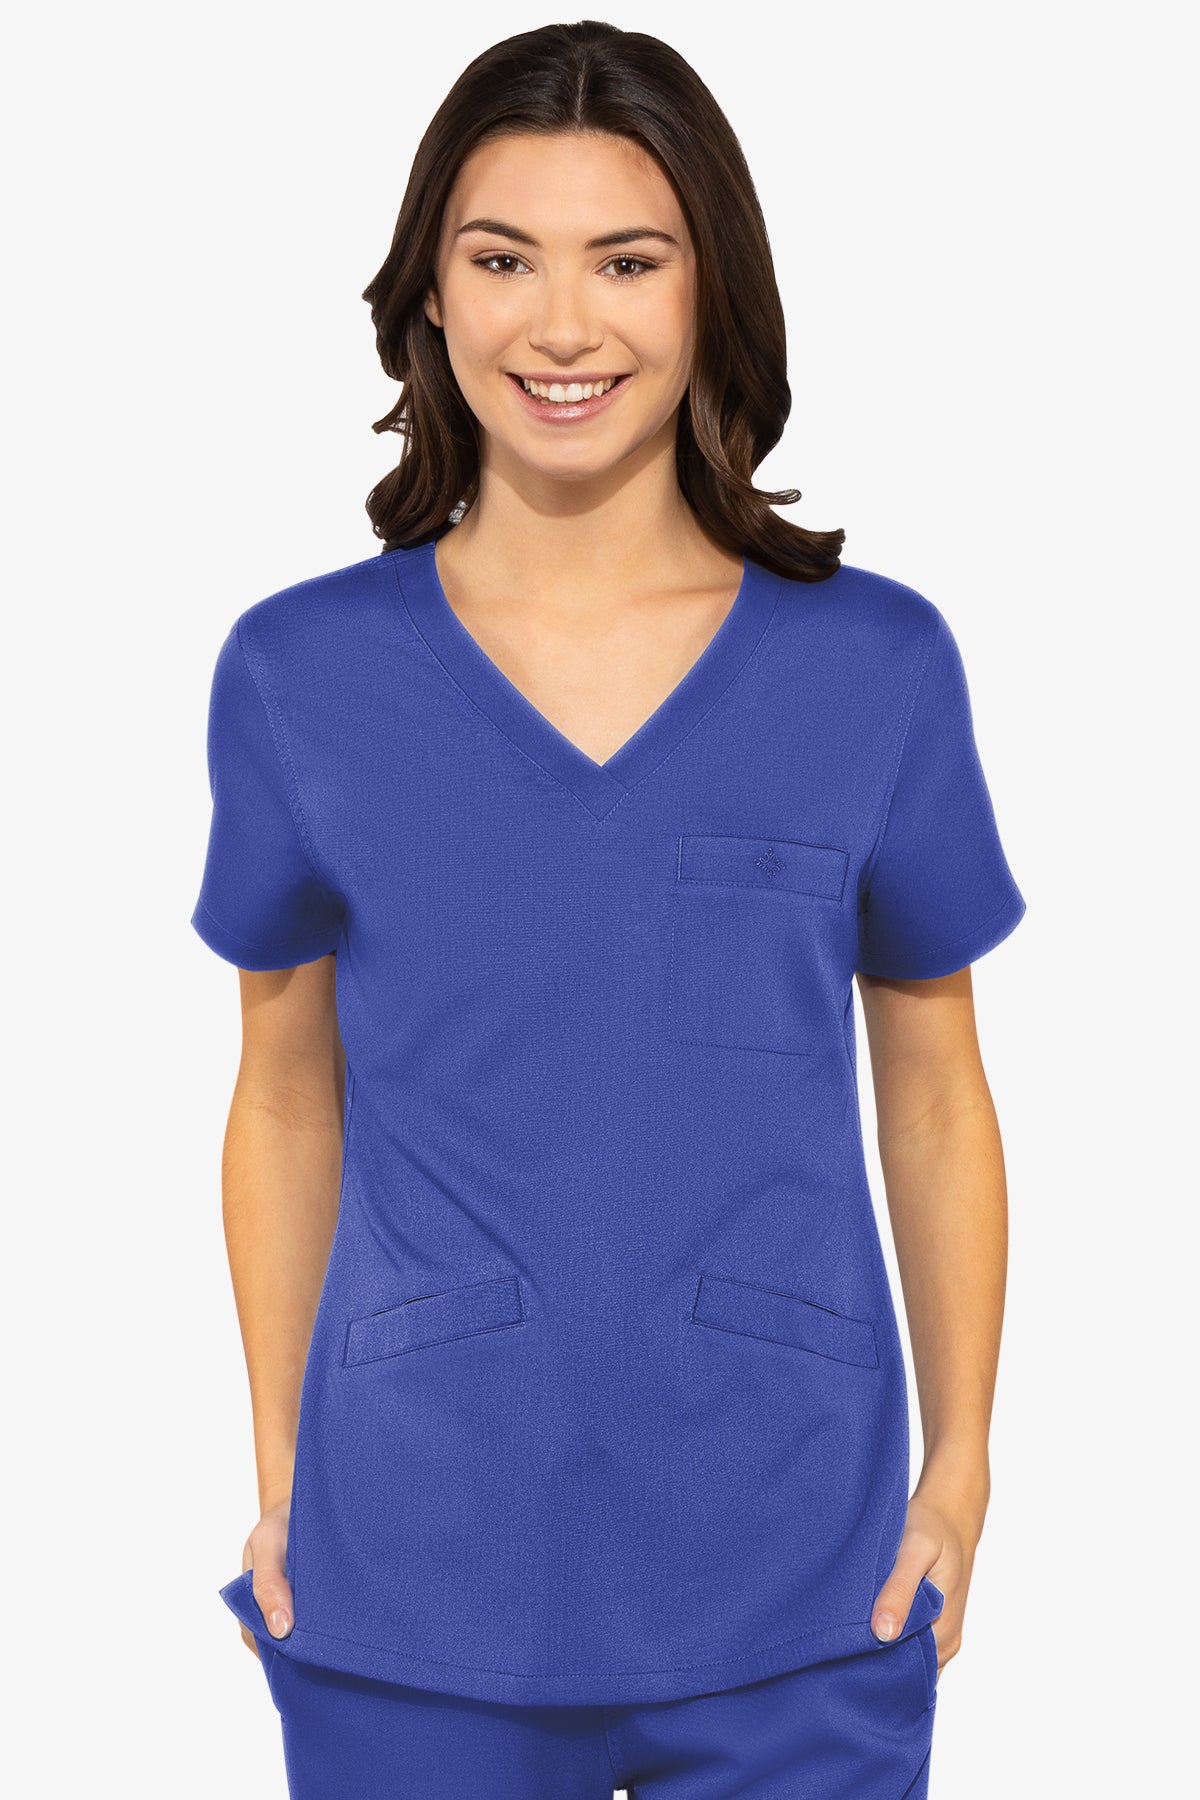 Med Couture Scrub Top Touch Classic V-Neck in Royal at Parker's Clothing and Shoes.